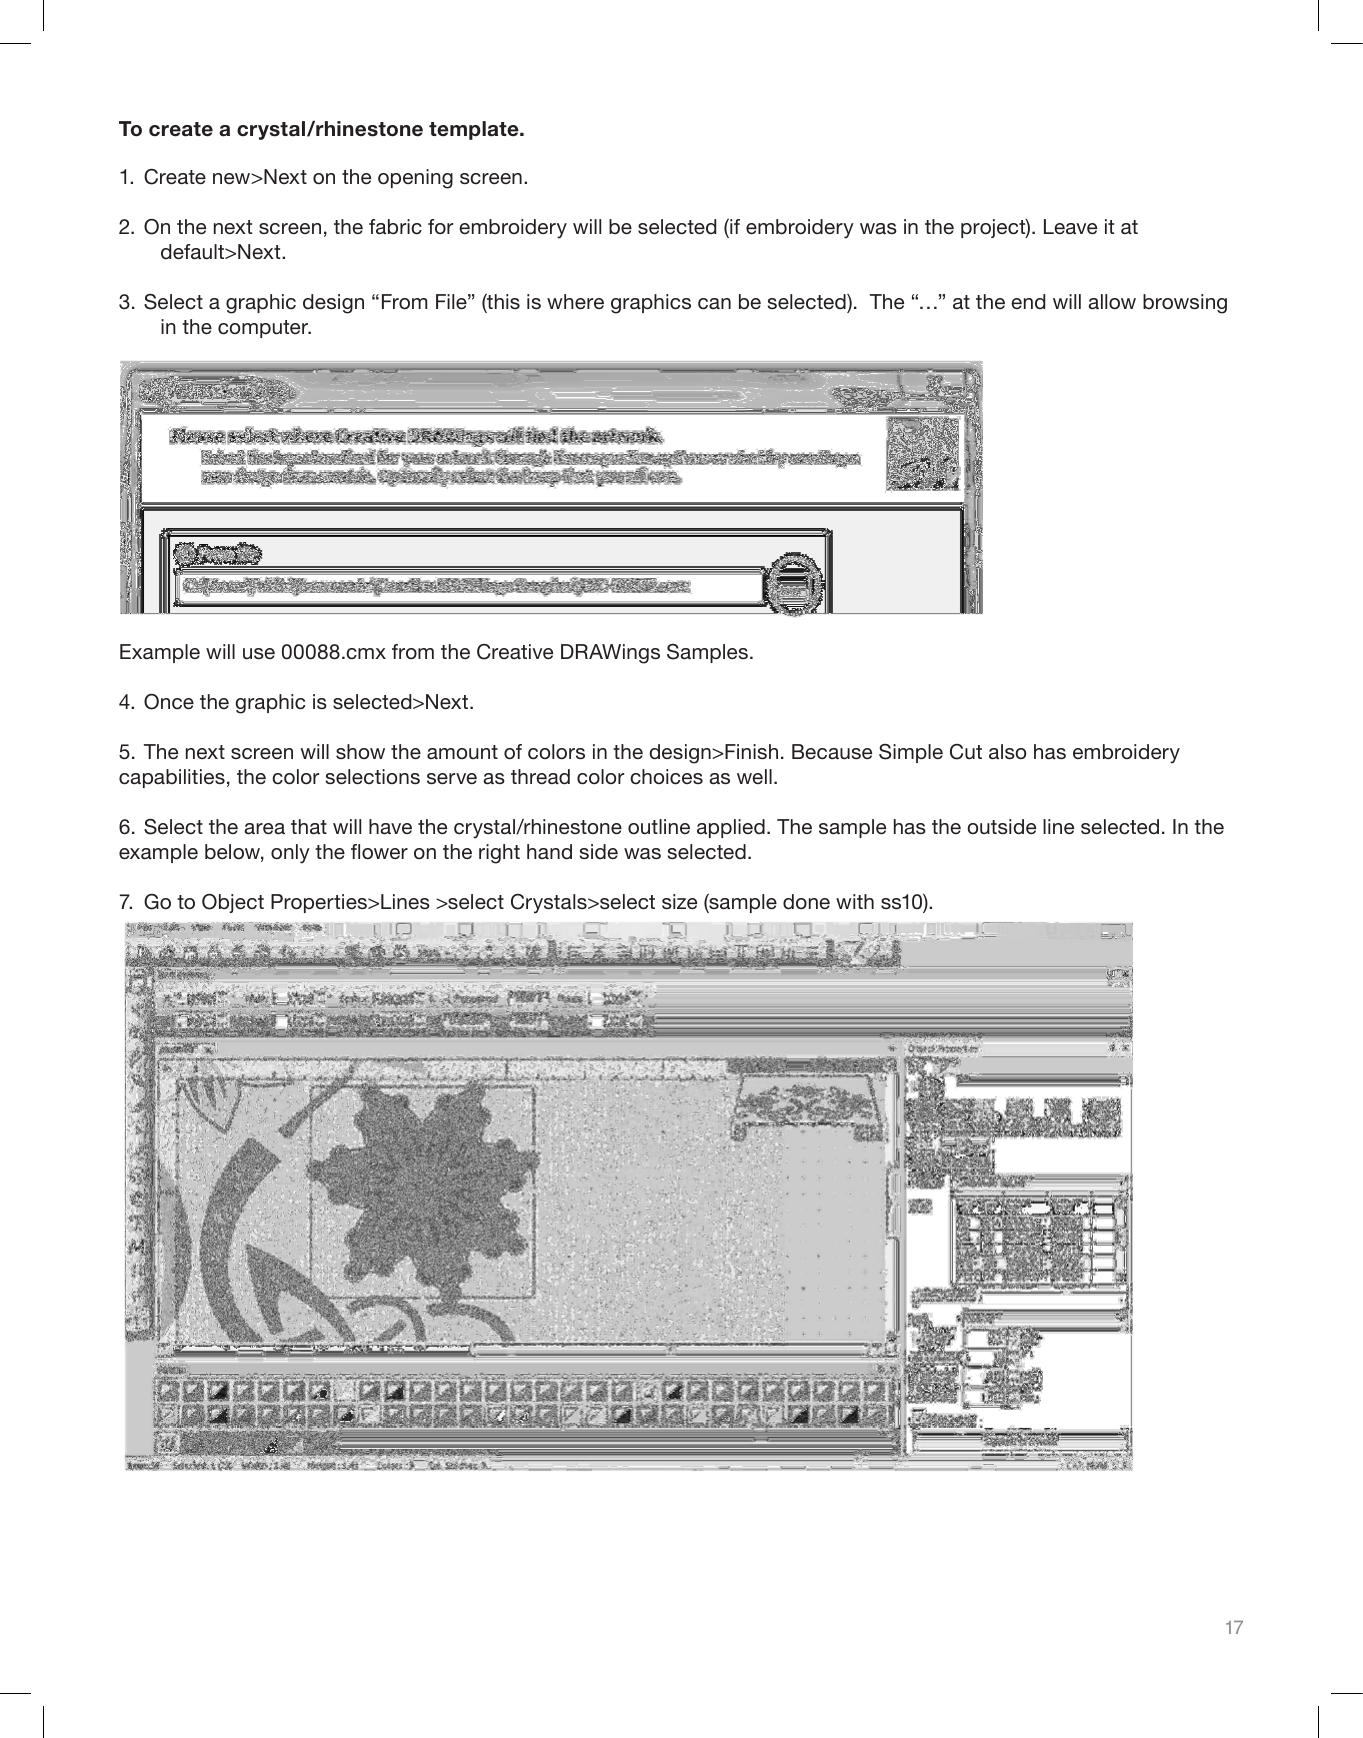 17To create a crystal/rhinestone template. 1.  Create new&gt;Next on the opening screen.2. On the next screen, the fabric for embroidery will be selected (if embroidery was in the project). Leave it at        default&gt;Next.3. Select a graphic design “From File” (this is where graphics can be selected).  The “…” at the end will allow browsing     in the computer.  Example will use 00088.cmx from the Creative DRAWings Samples.  4. Once the graphic is selected&gt;Next.5. The next screen will show the amount of colors in the design&gt;Finish. Because Simple Cut also has embroidery capabilities, the color selections serve as thread color choices as well.6. Select the area that will have the crystal/rhinestone outline applied. The sample has the outside line selected. In the example below, only the ower on the right hand side was selected.7.  Go to Object Properties&gt;Lines &gt;select Crystals&gt;select size (sample done with ss10).     